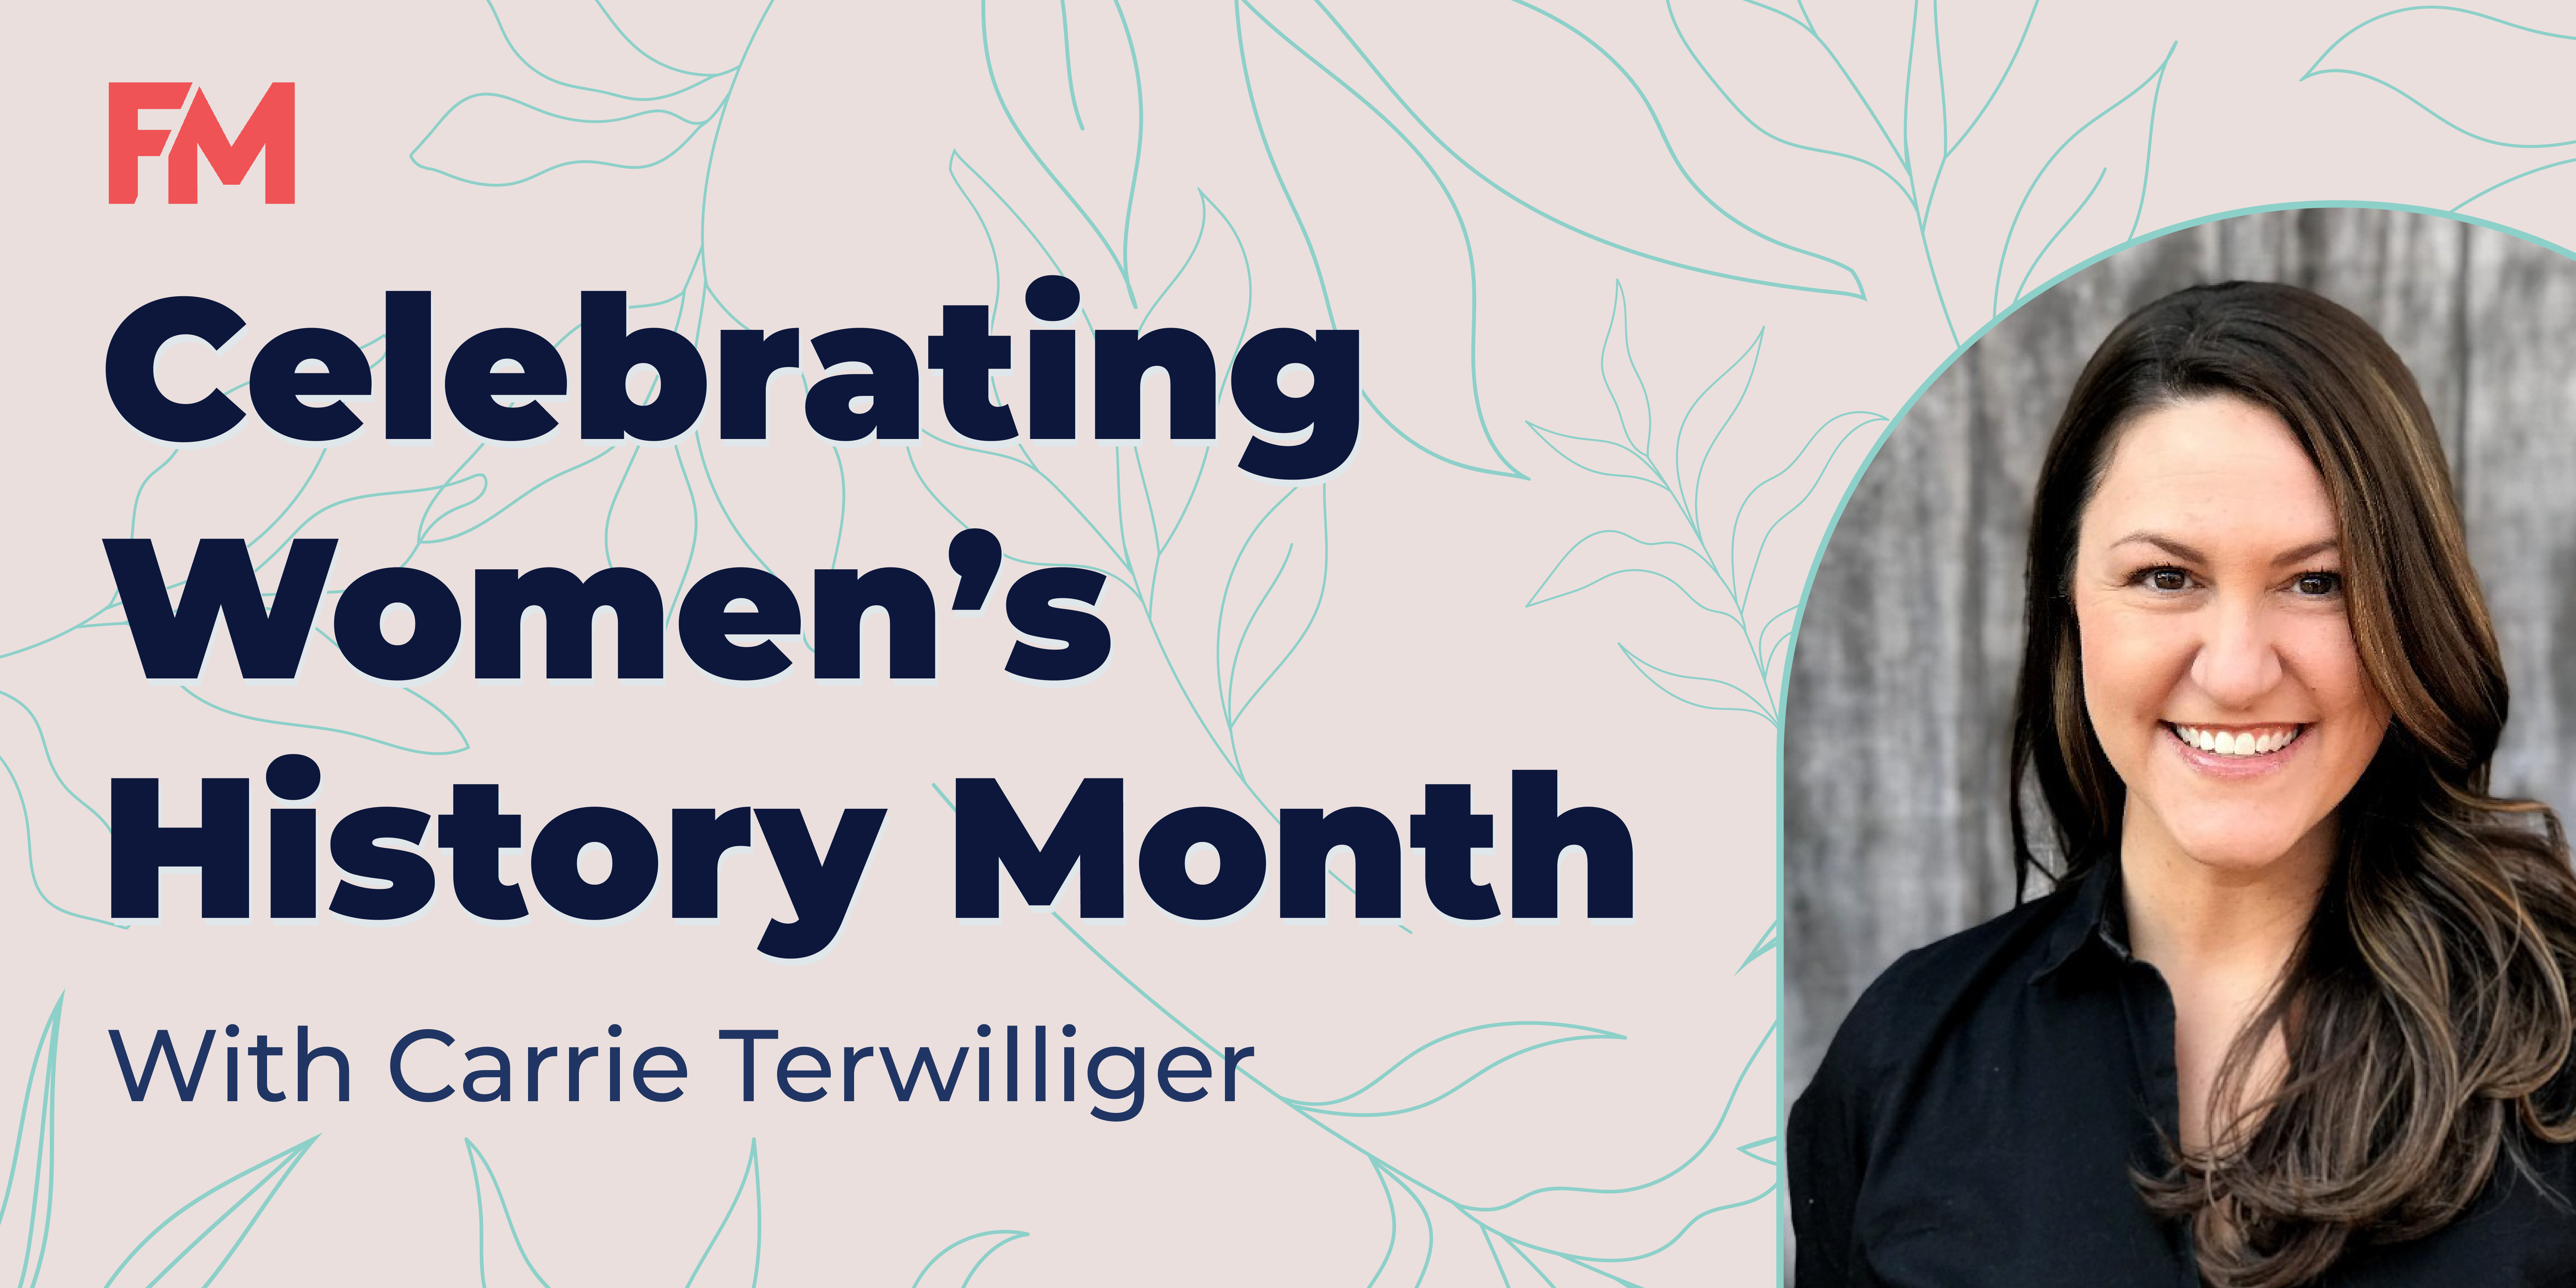 Women's History Month - Carrie Terwilliger